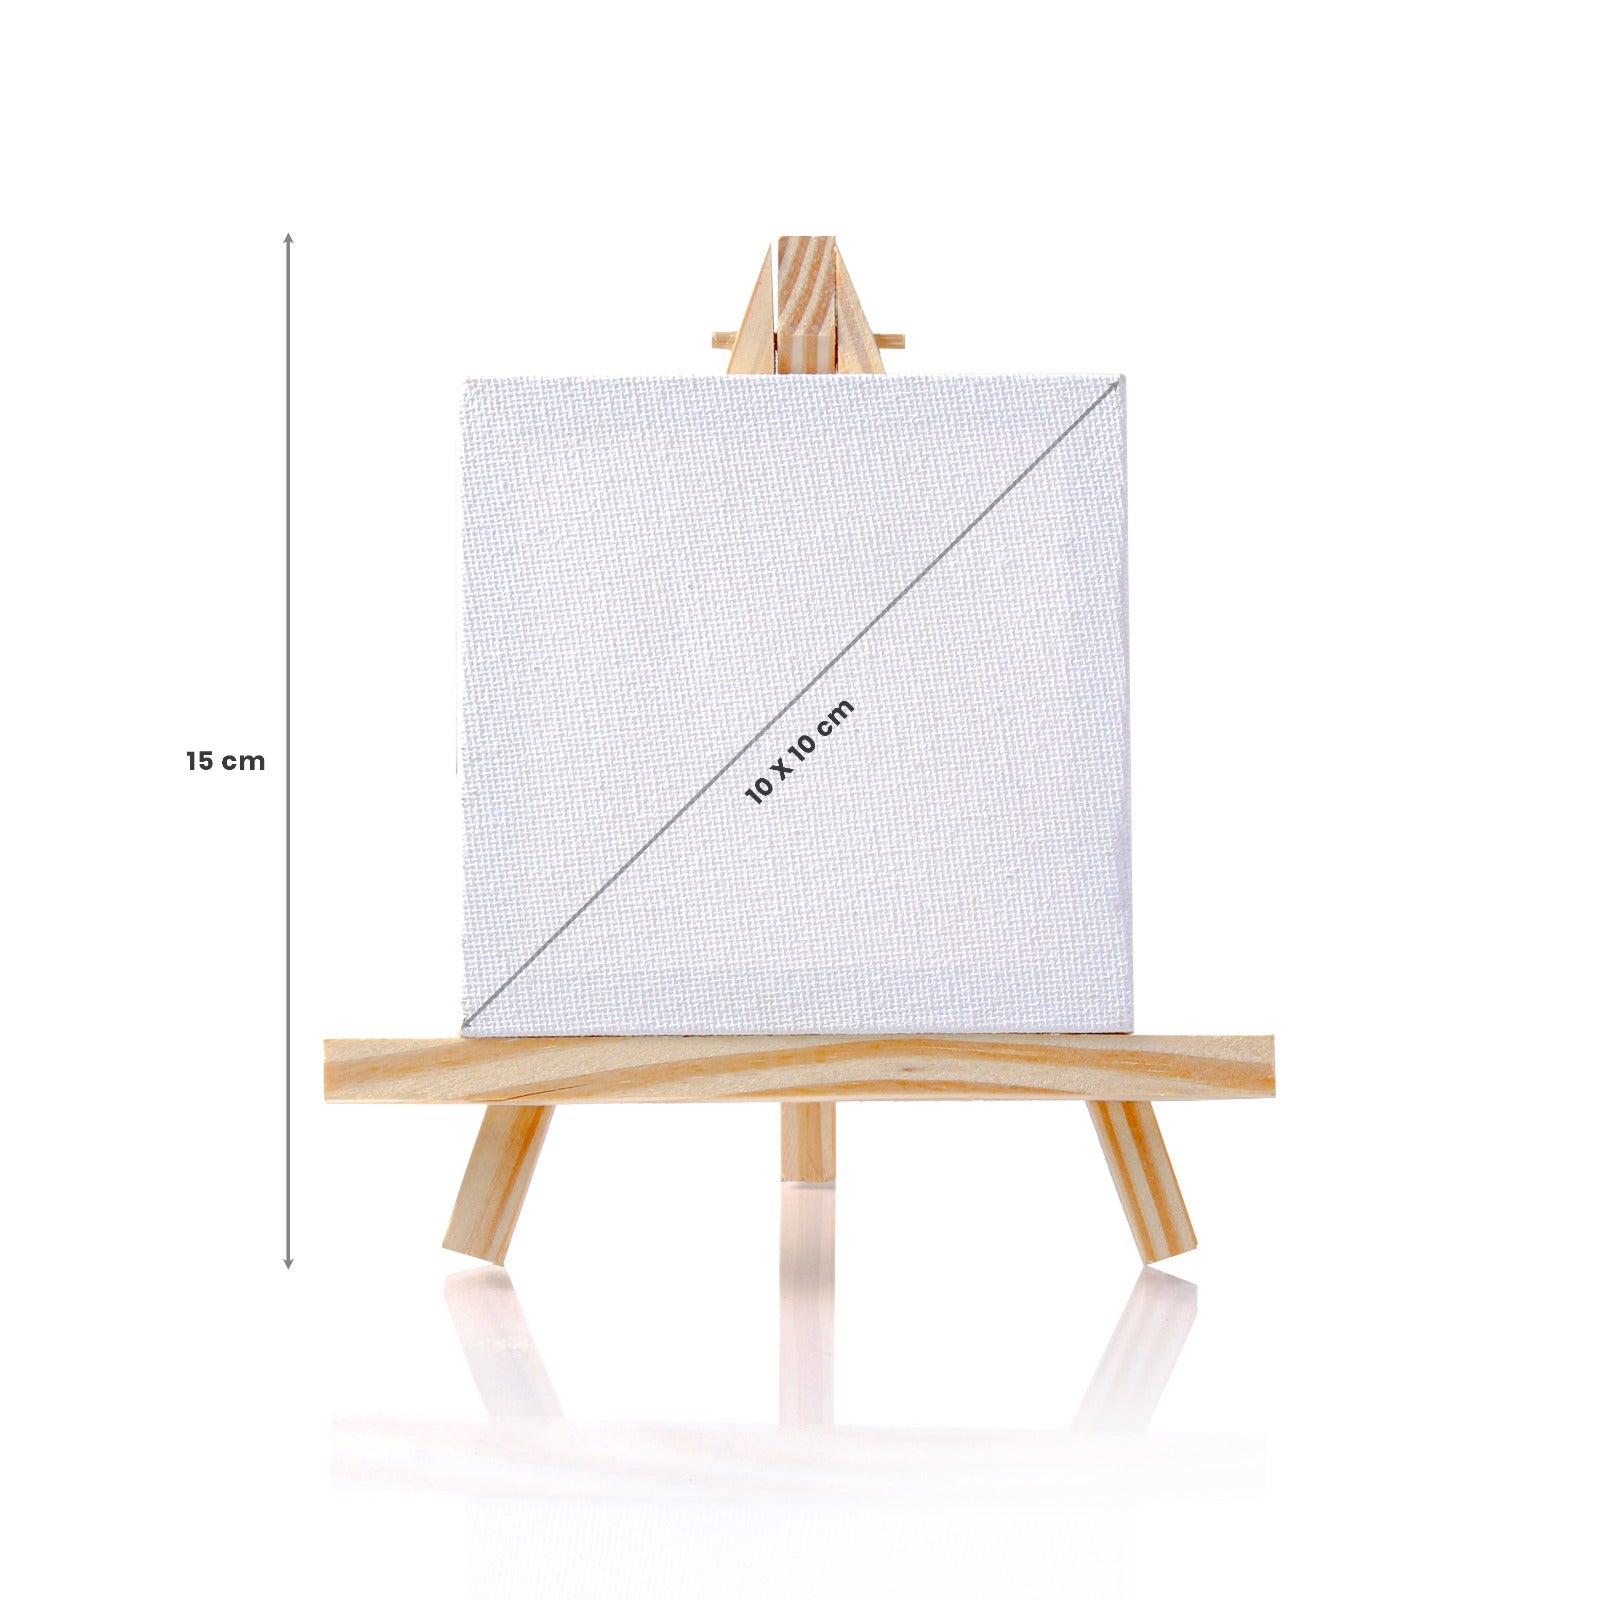 Wooden Mini Easel With Canvas Easel Size 15cm Canvas Size 10 X 10cm Set of 5pc